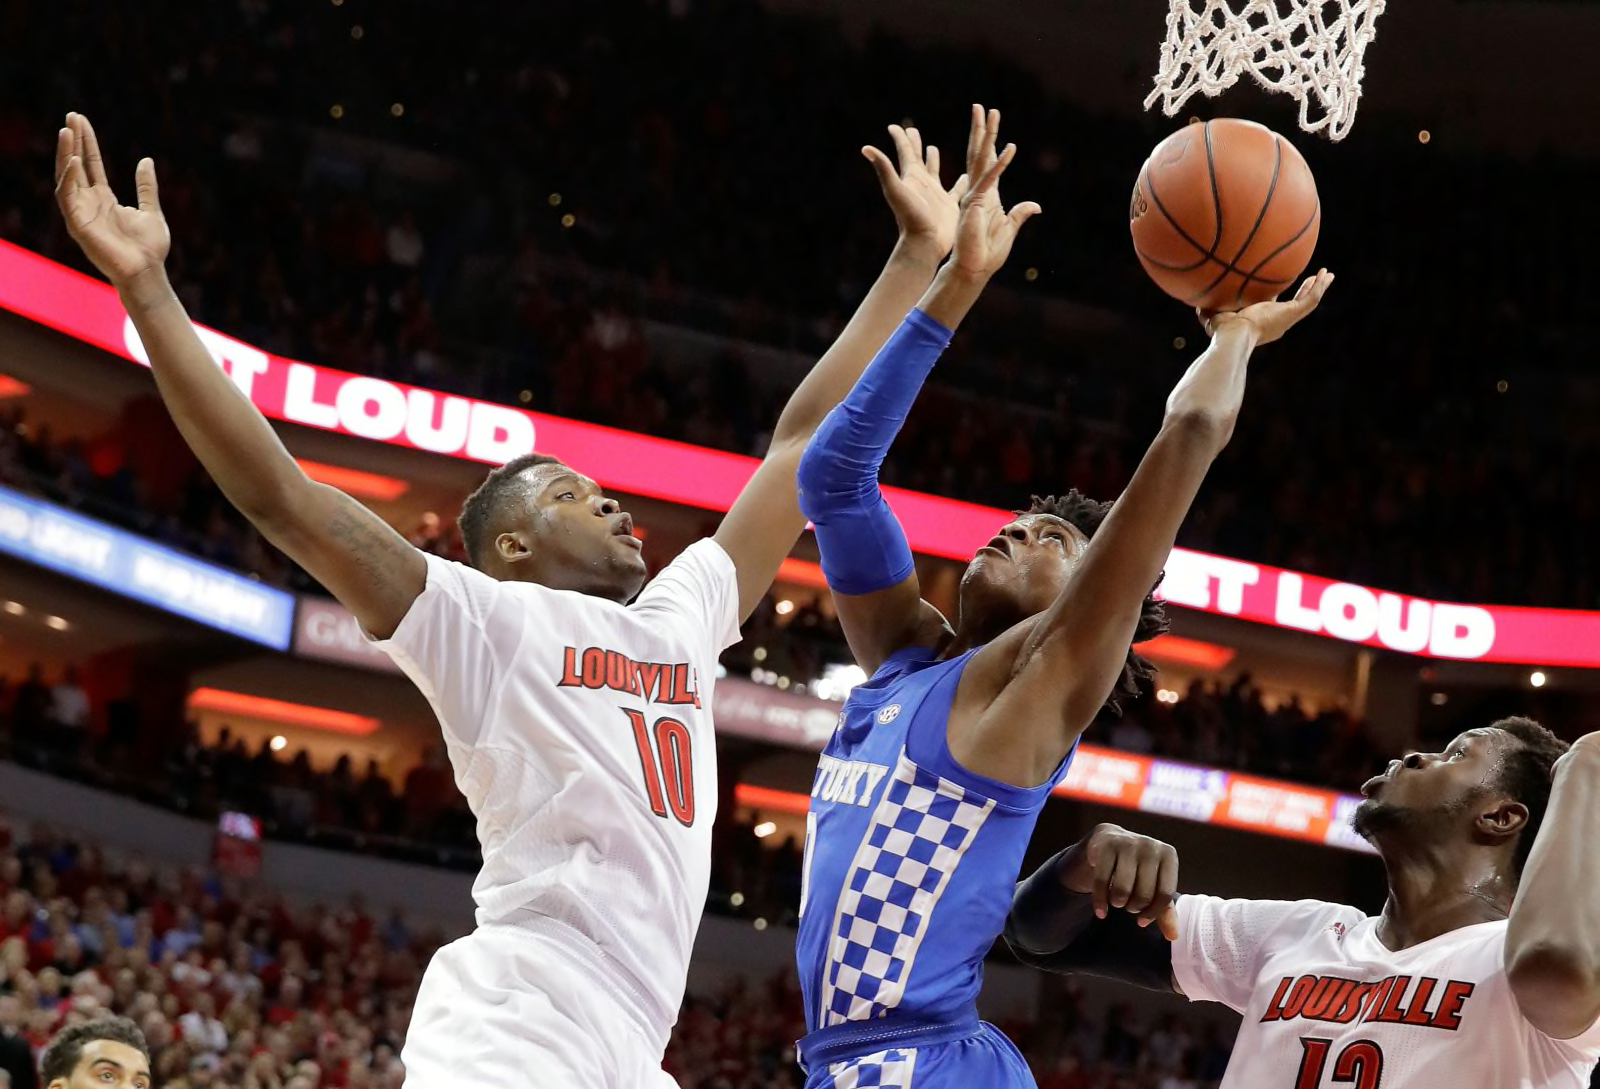 Kentucky vs. Louisville: Best games from the last decade of the rivalry - Page 2